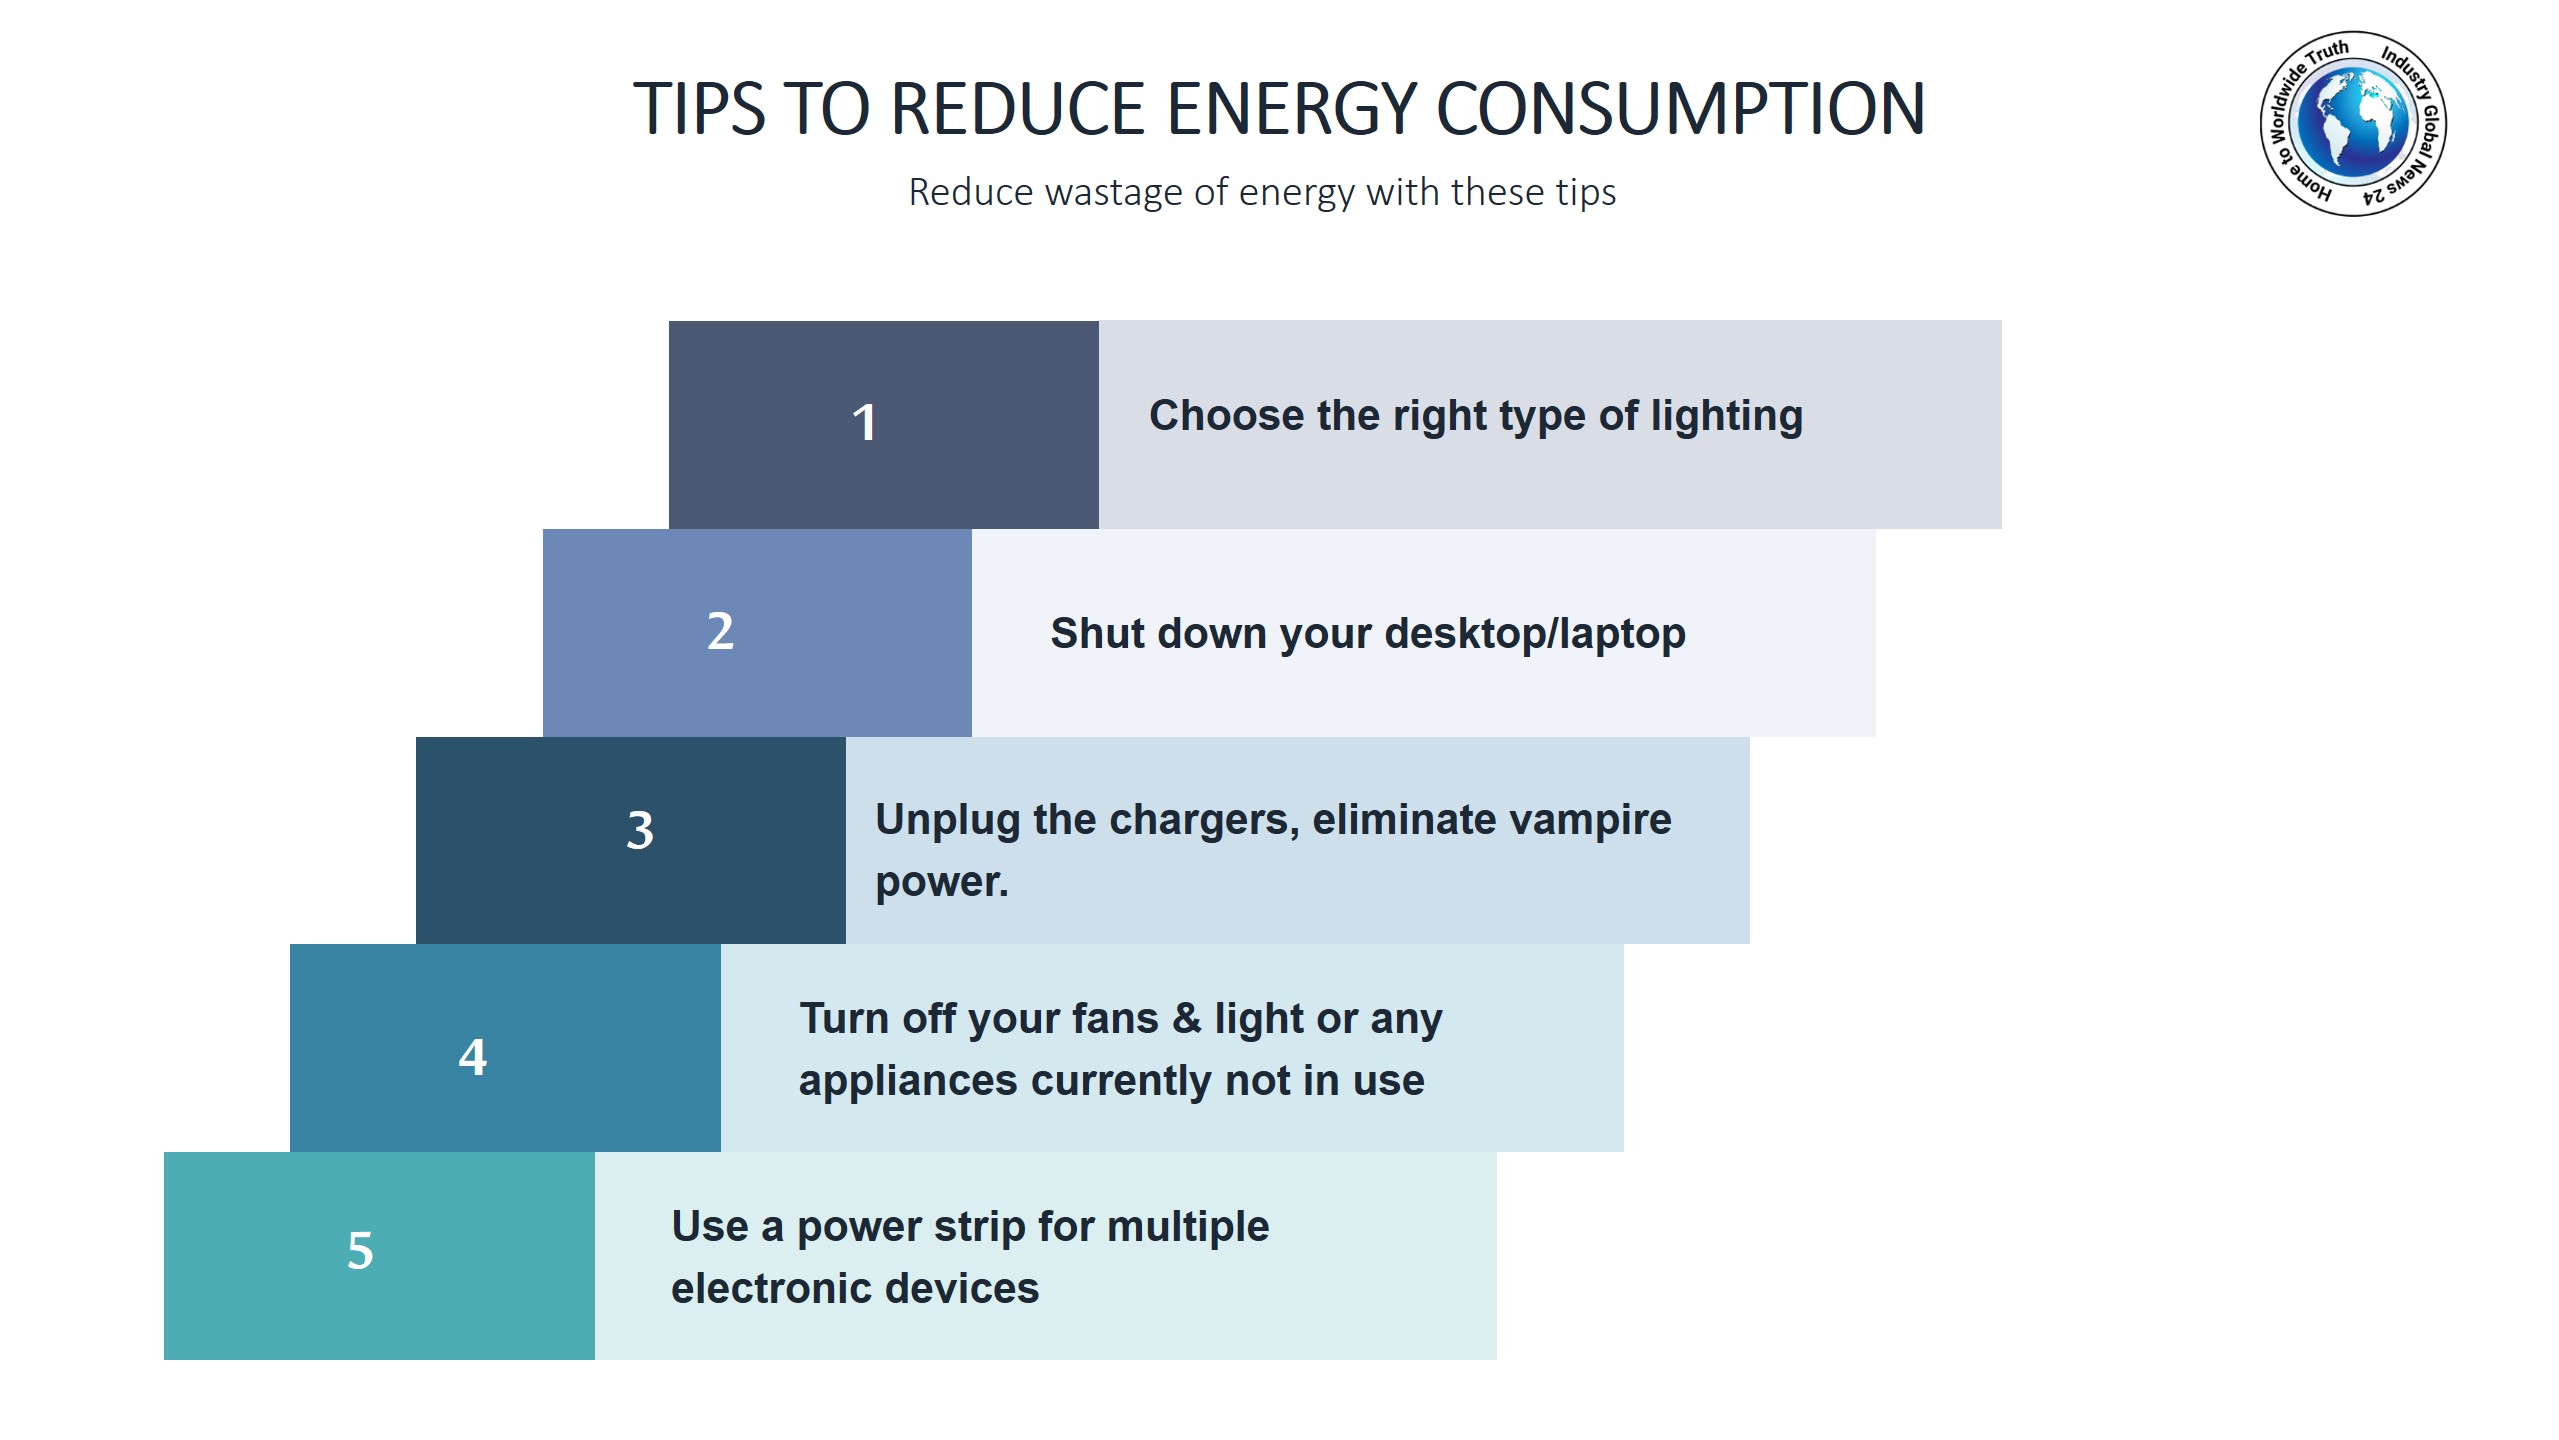 Tips to reduce energy consumption